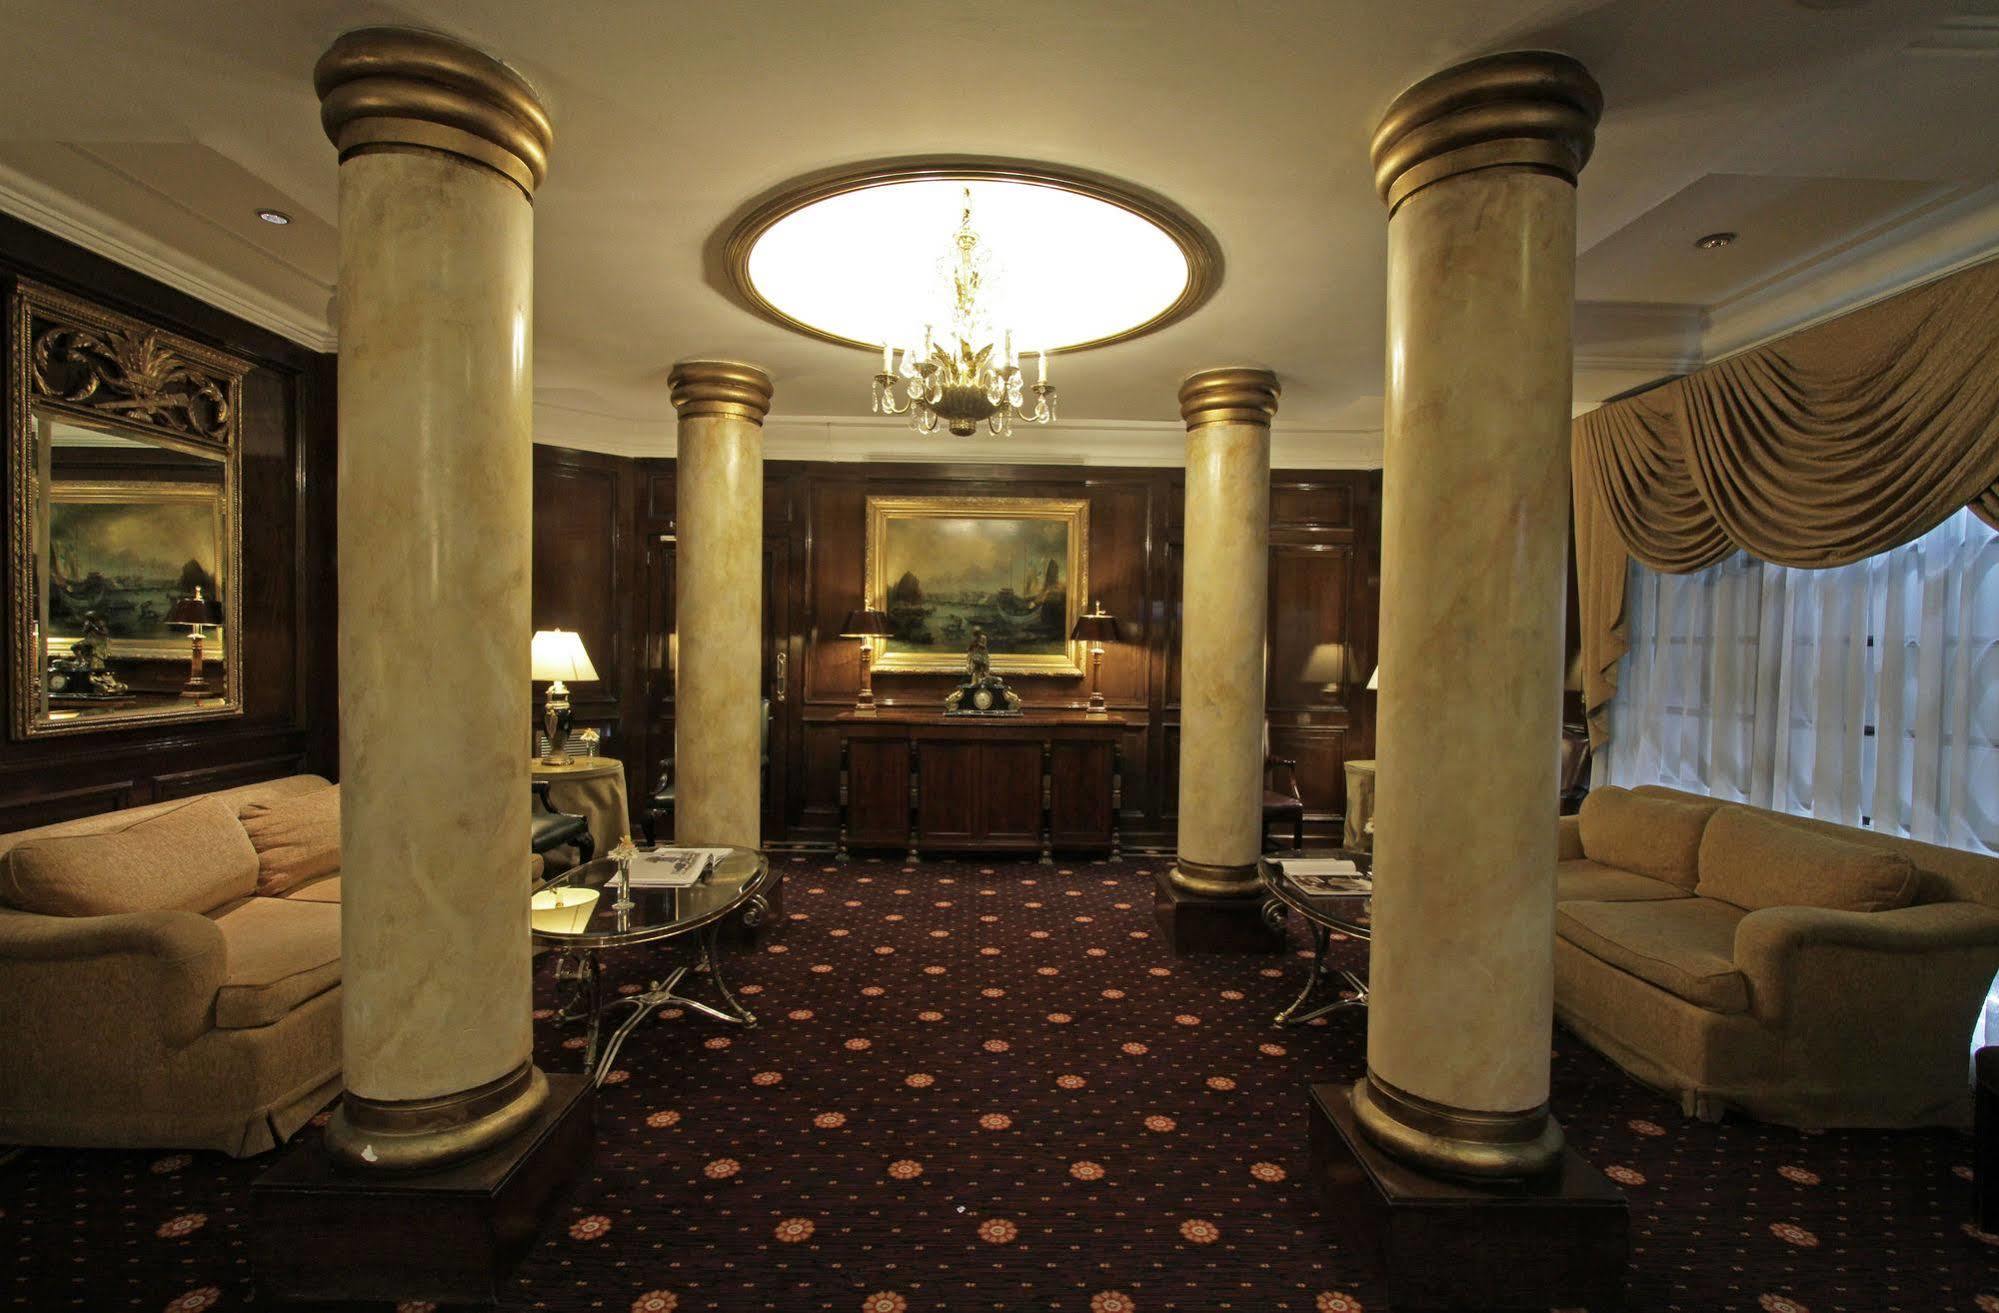 Plaza Hotel Buenos Aires Buitenkant foto